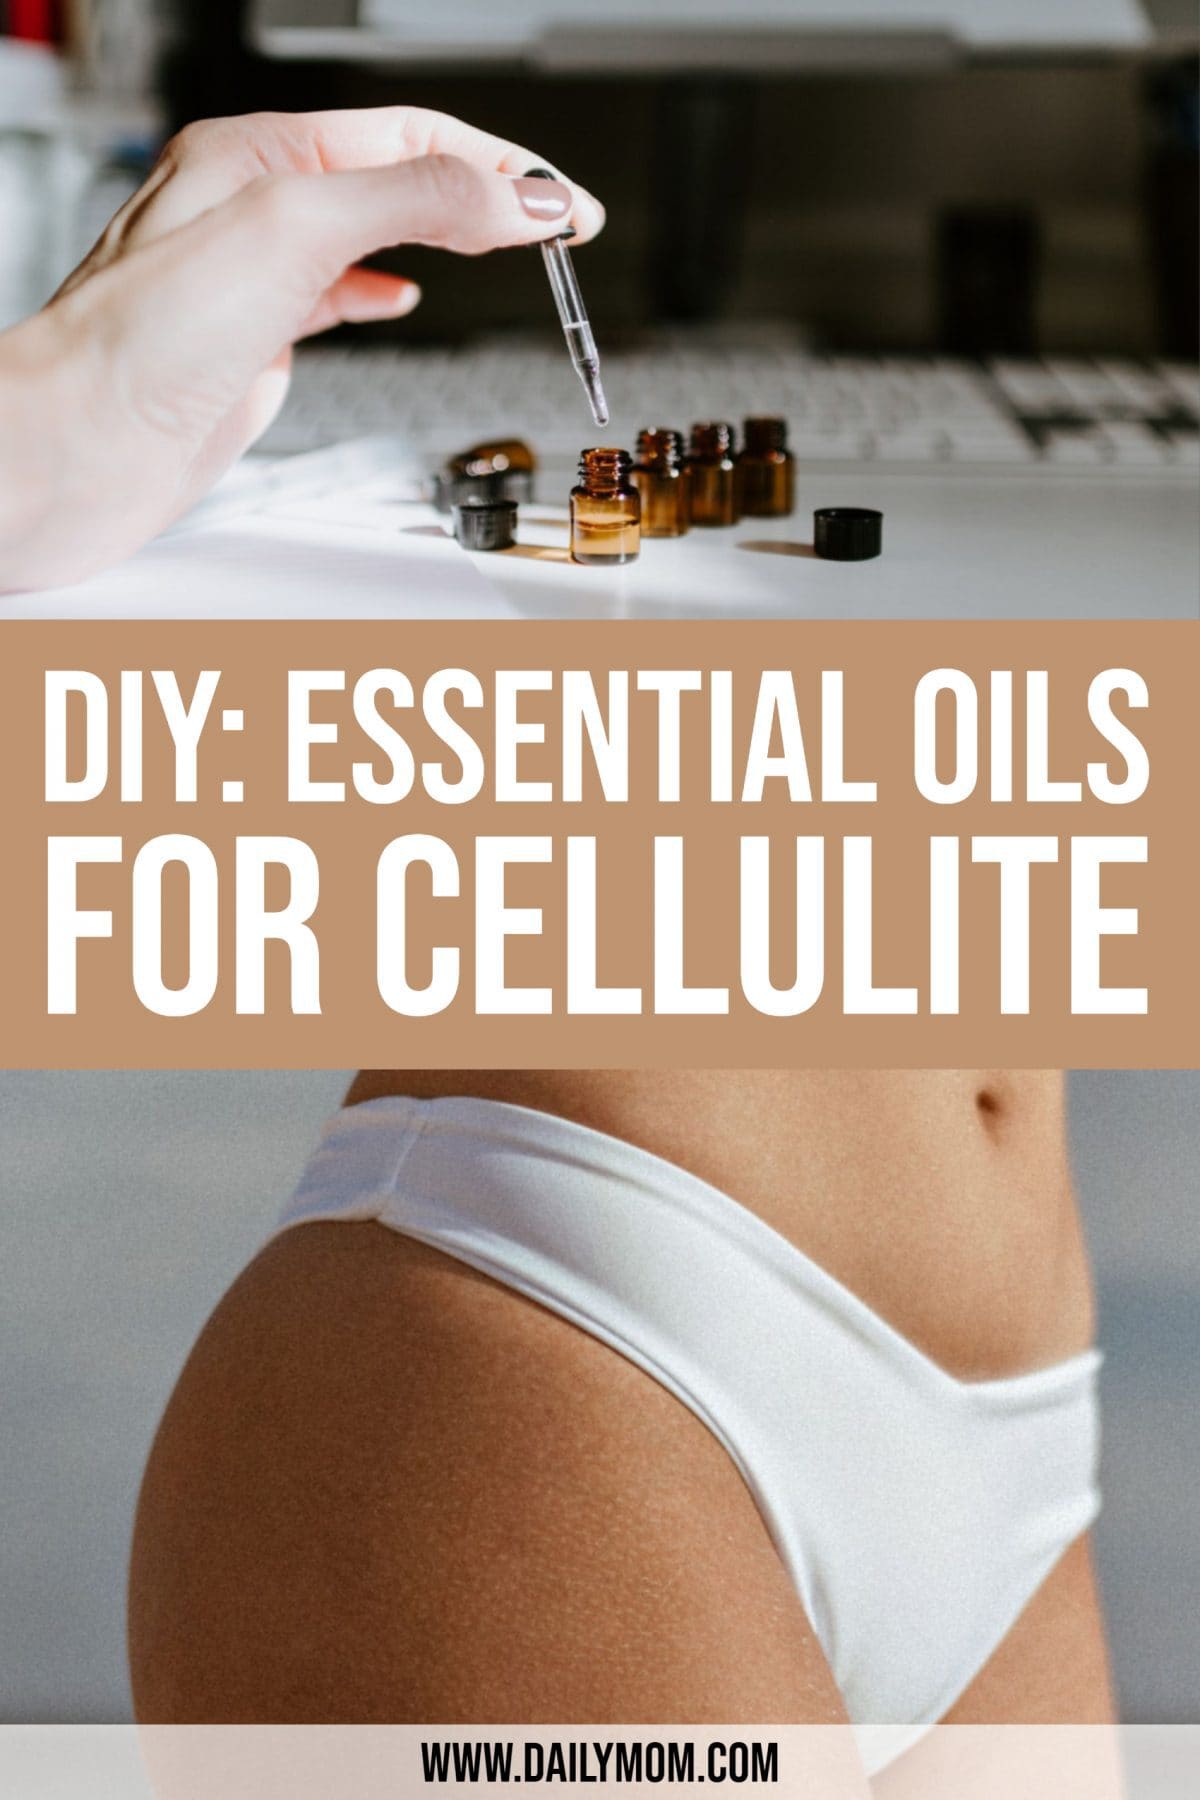 Essential Oils For Cellulite: When And How To Use Them